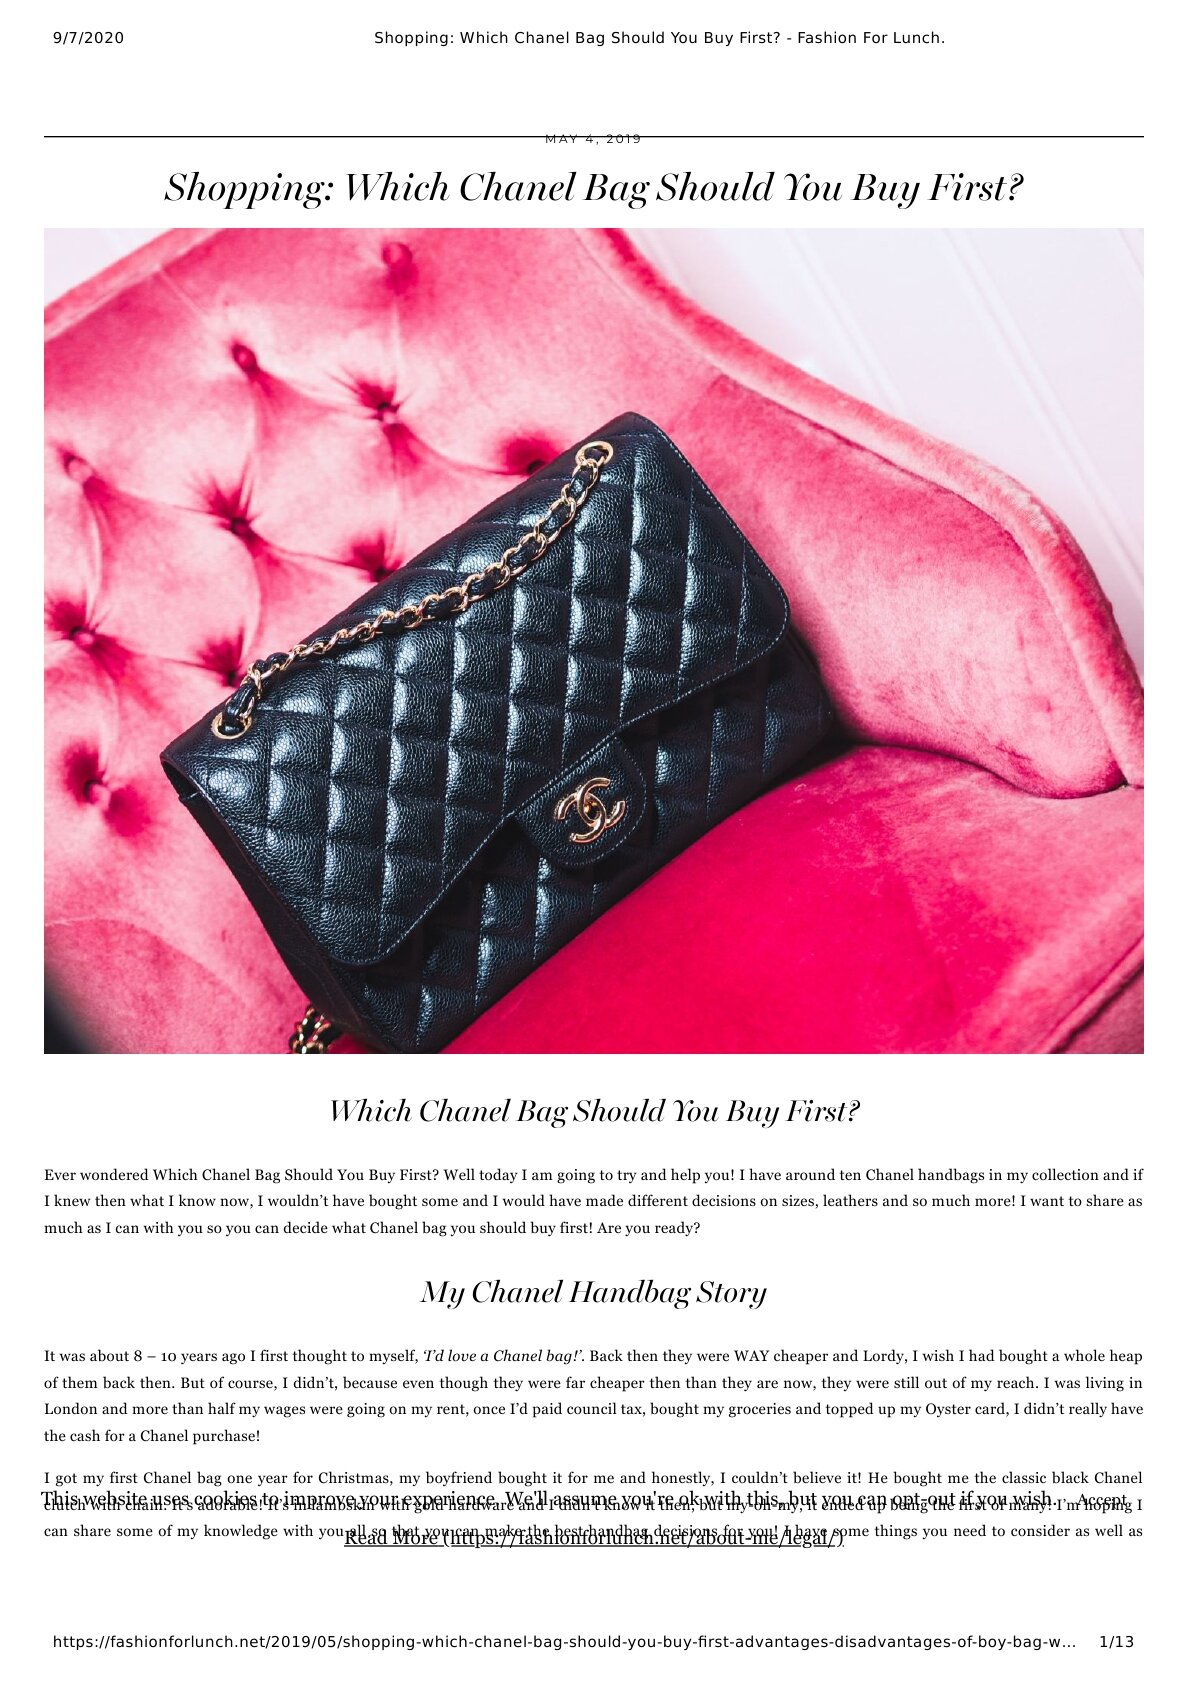 18. Which Chanel Bag Should You Buy First? - My Dreamz Closet